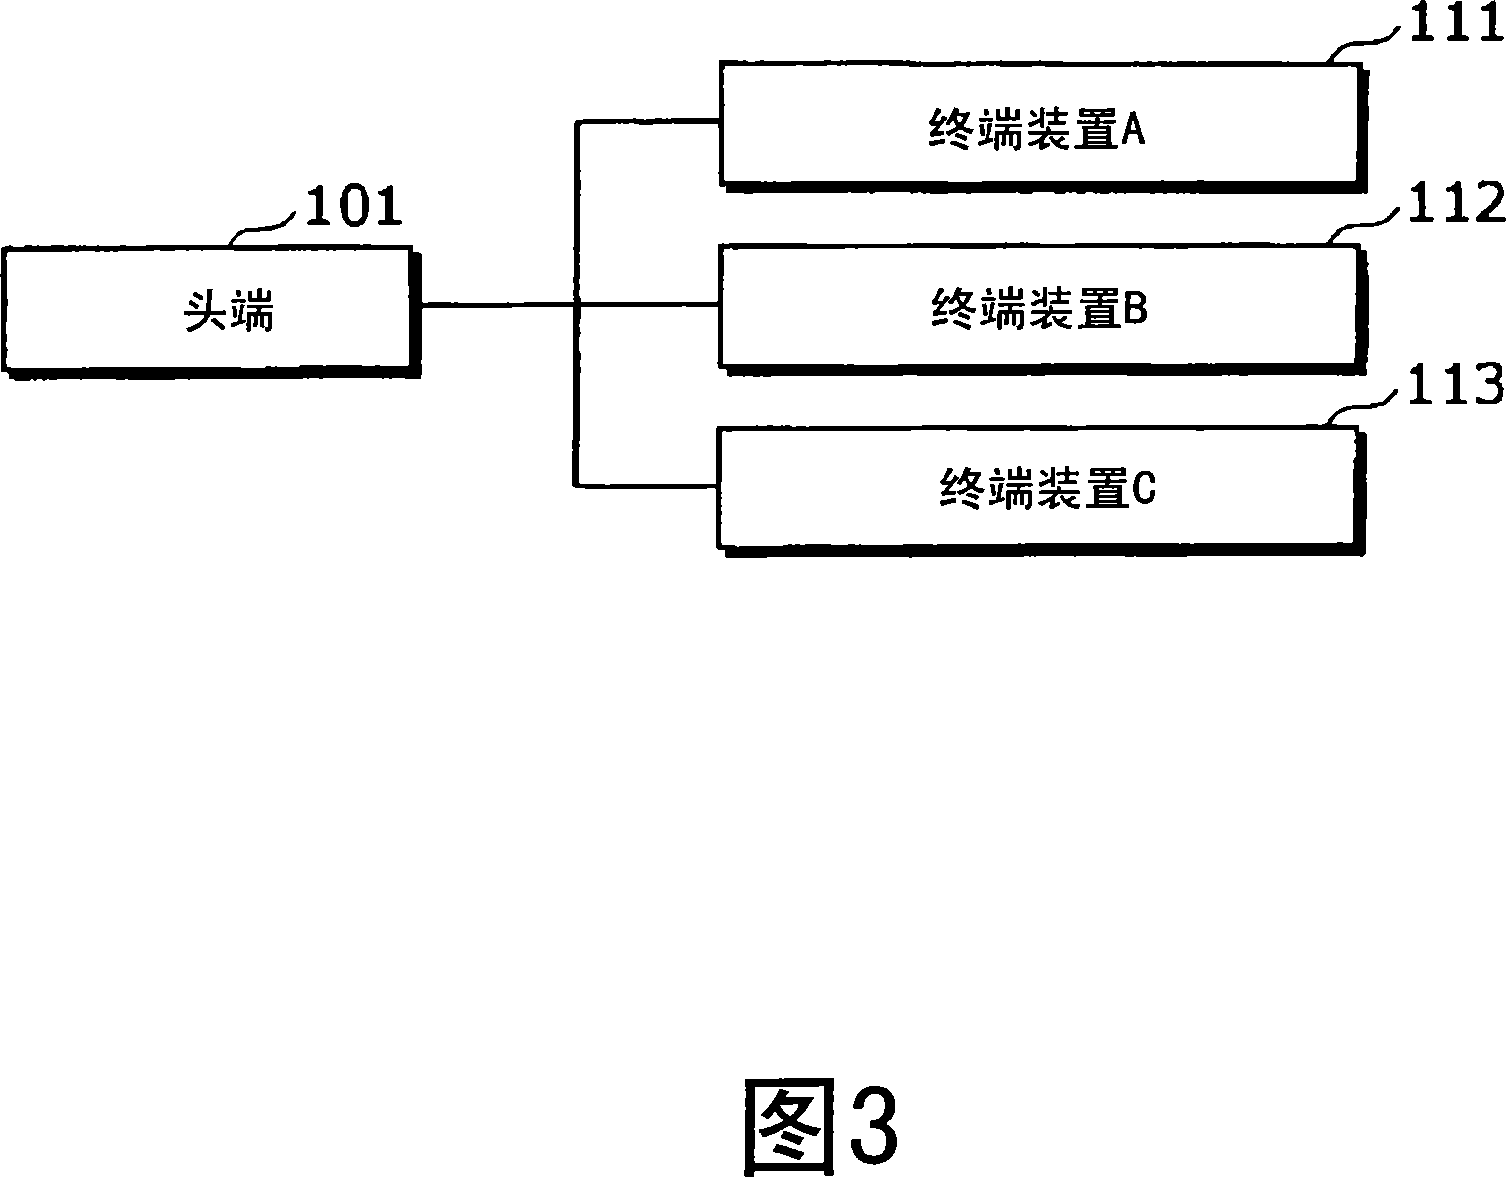 Display processing device